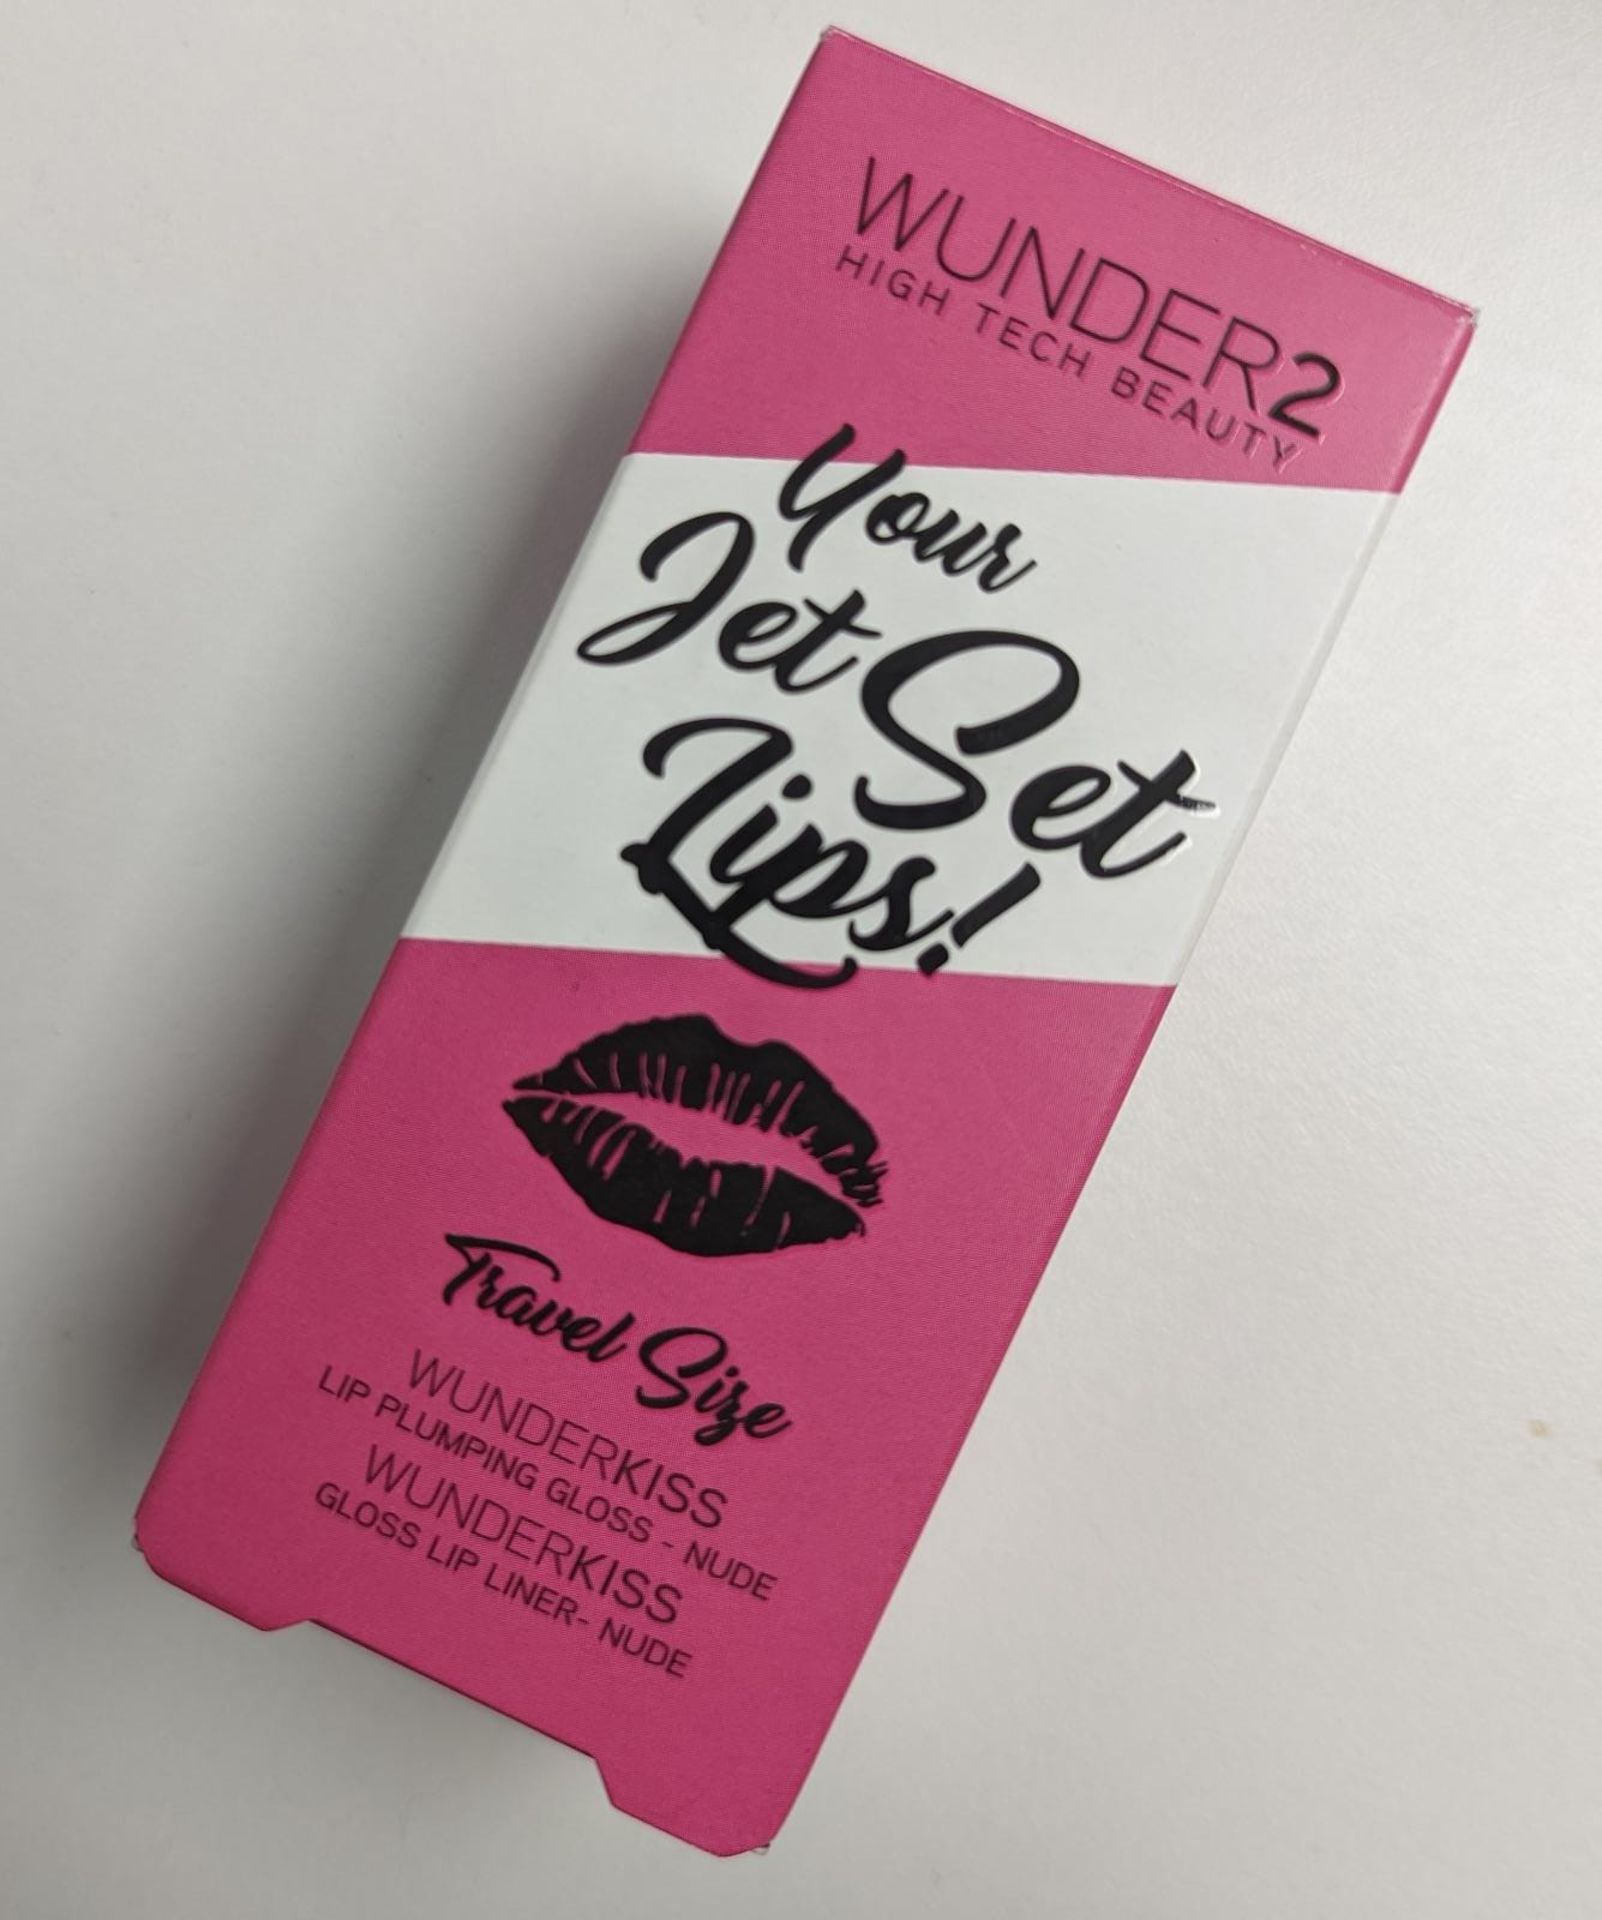 100 x Wunder2 lip kit - Contains lip plumping gloss nude and glass lip liner nude